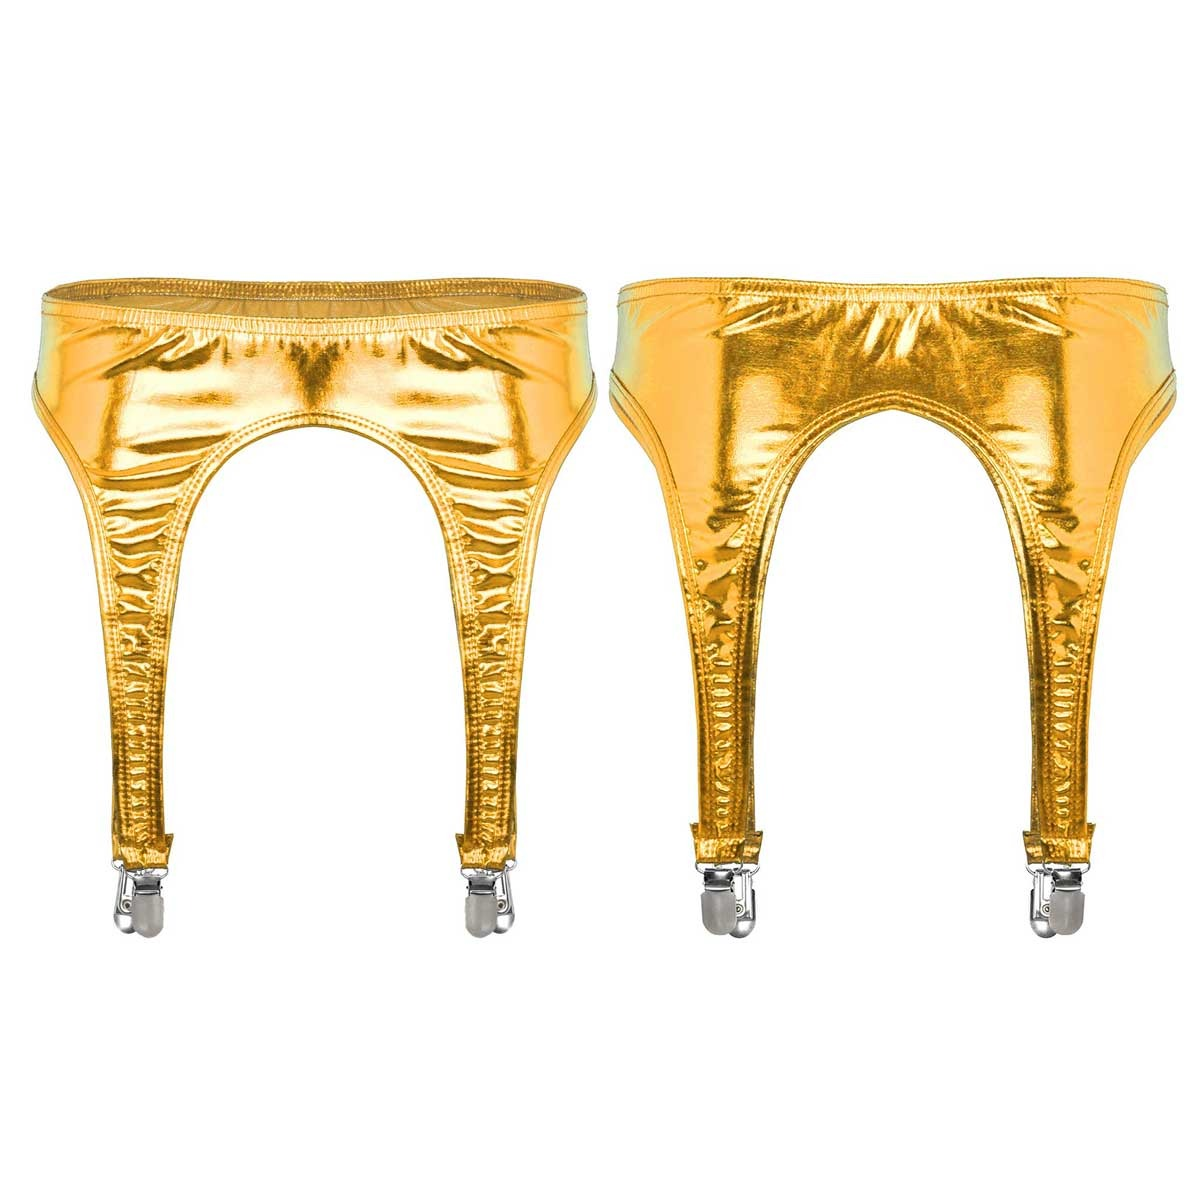 Women's Erotic Shiny Sexy Garter / Adult Underwear with Duck-Mouth Clips - EVE's SECRETS